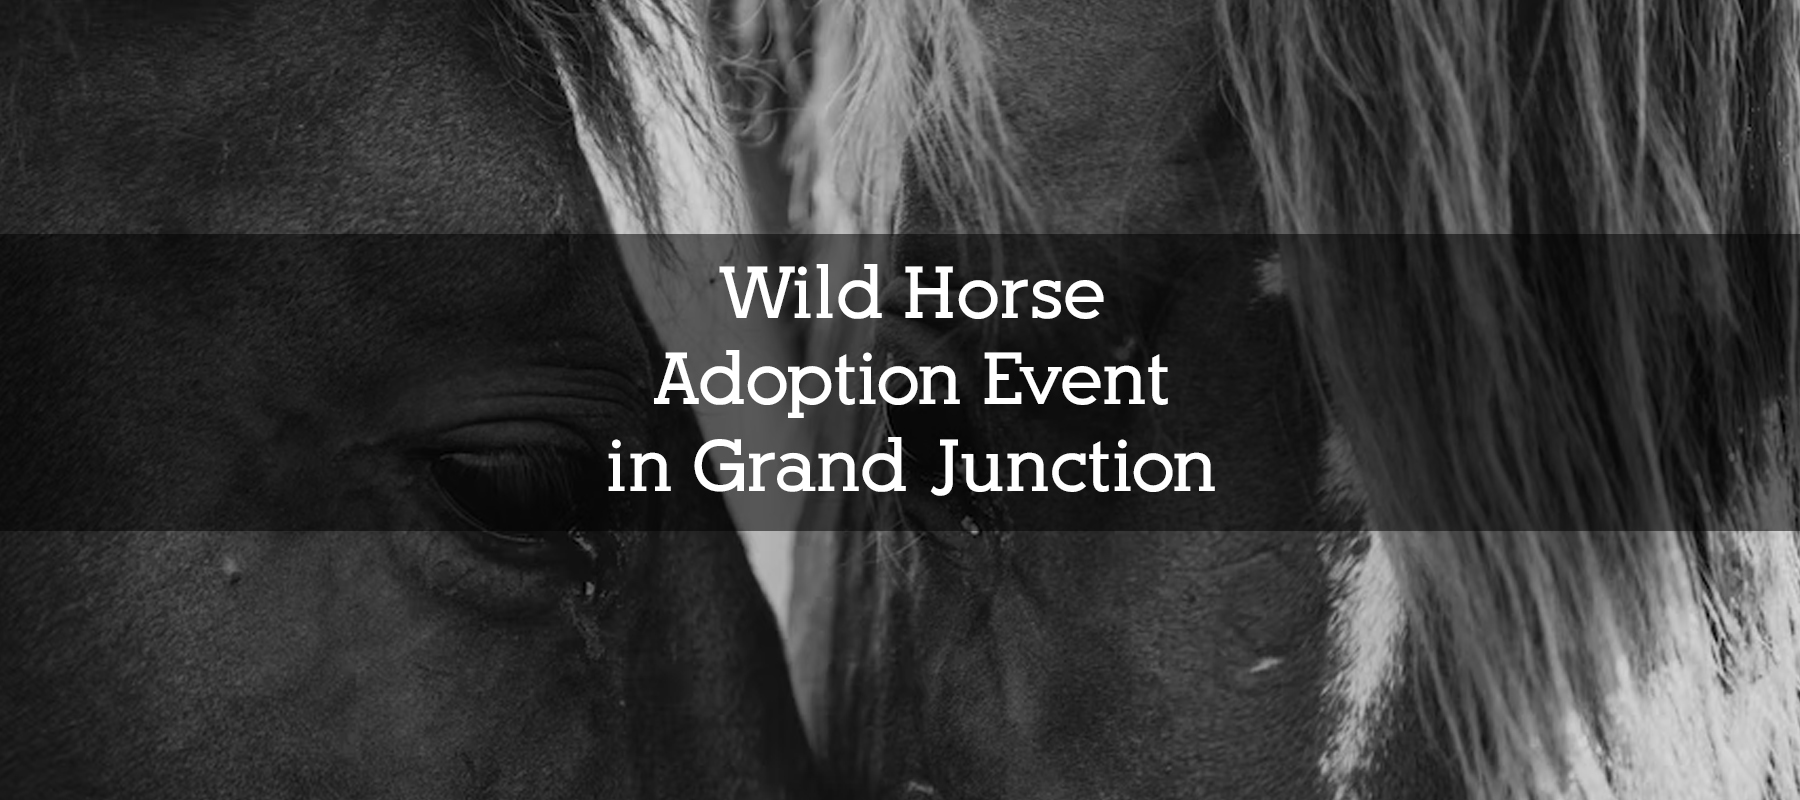 Wild Horse Adoption Event in Grand Junction